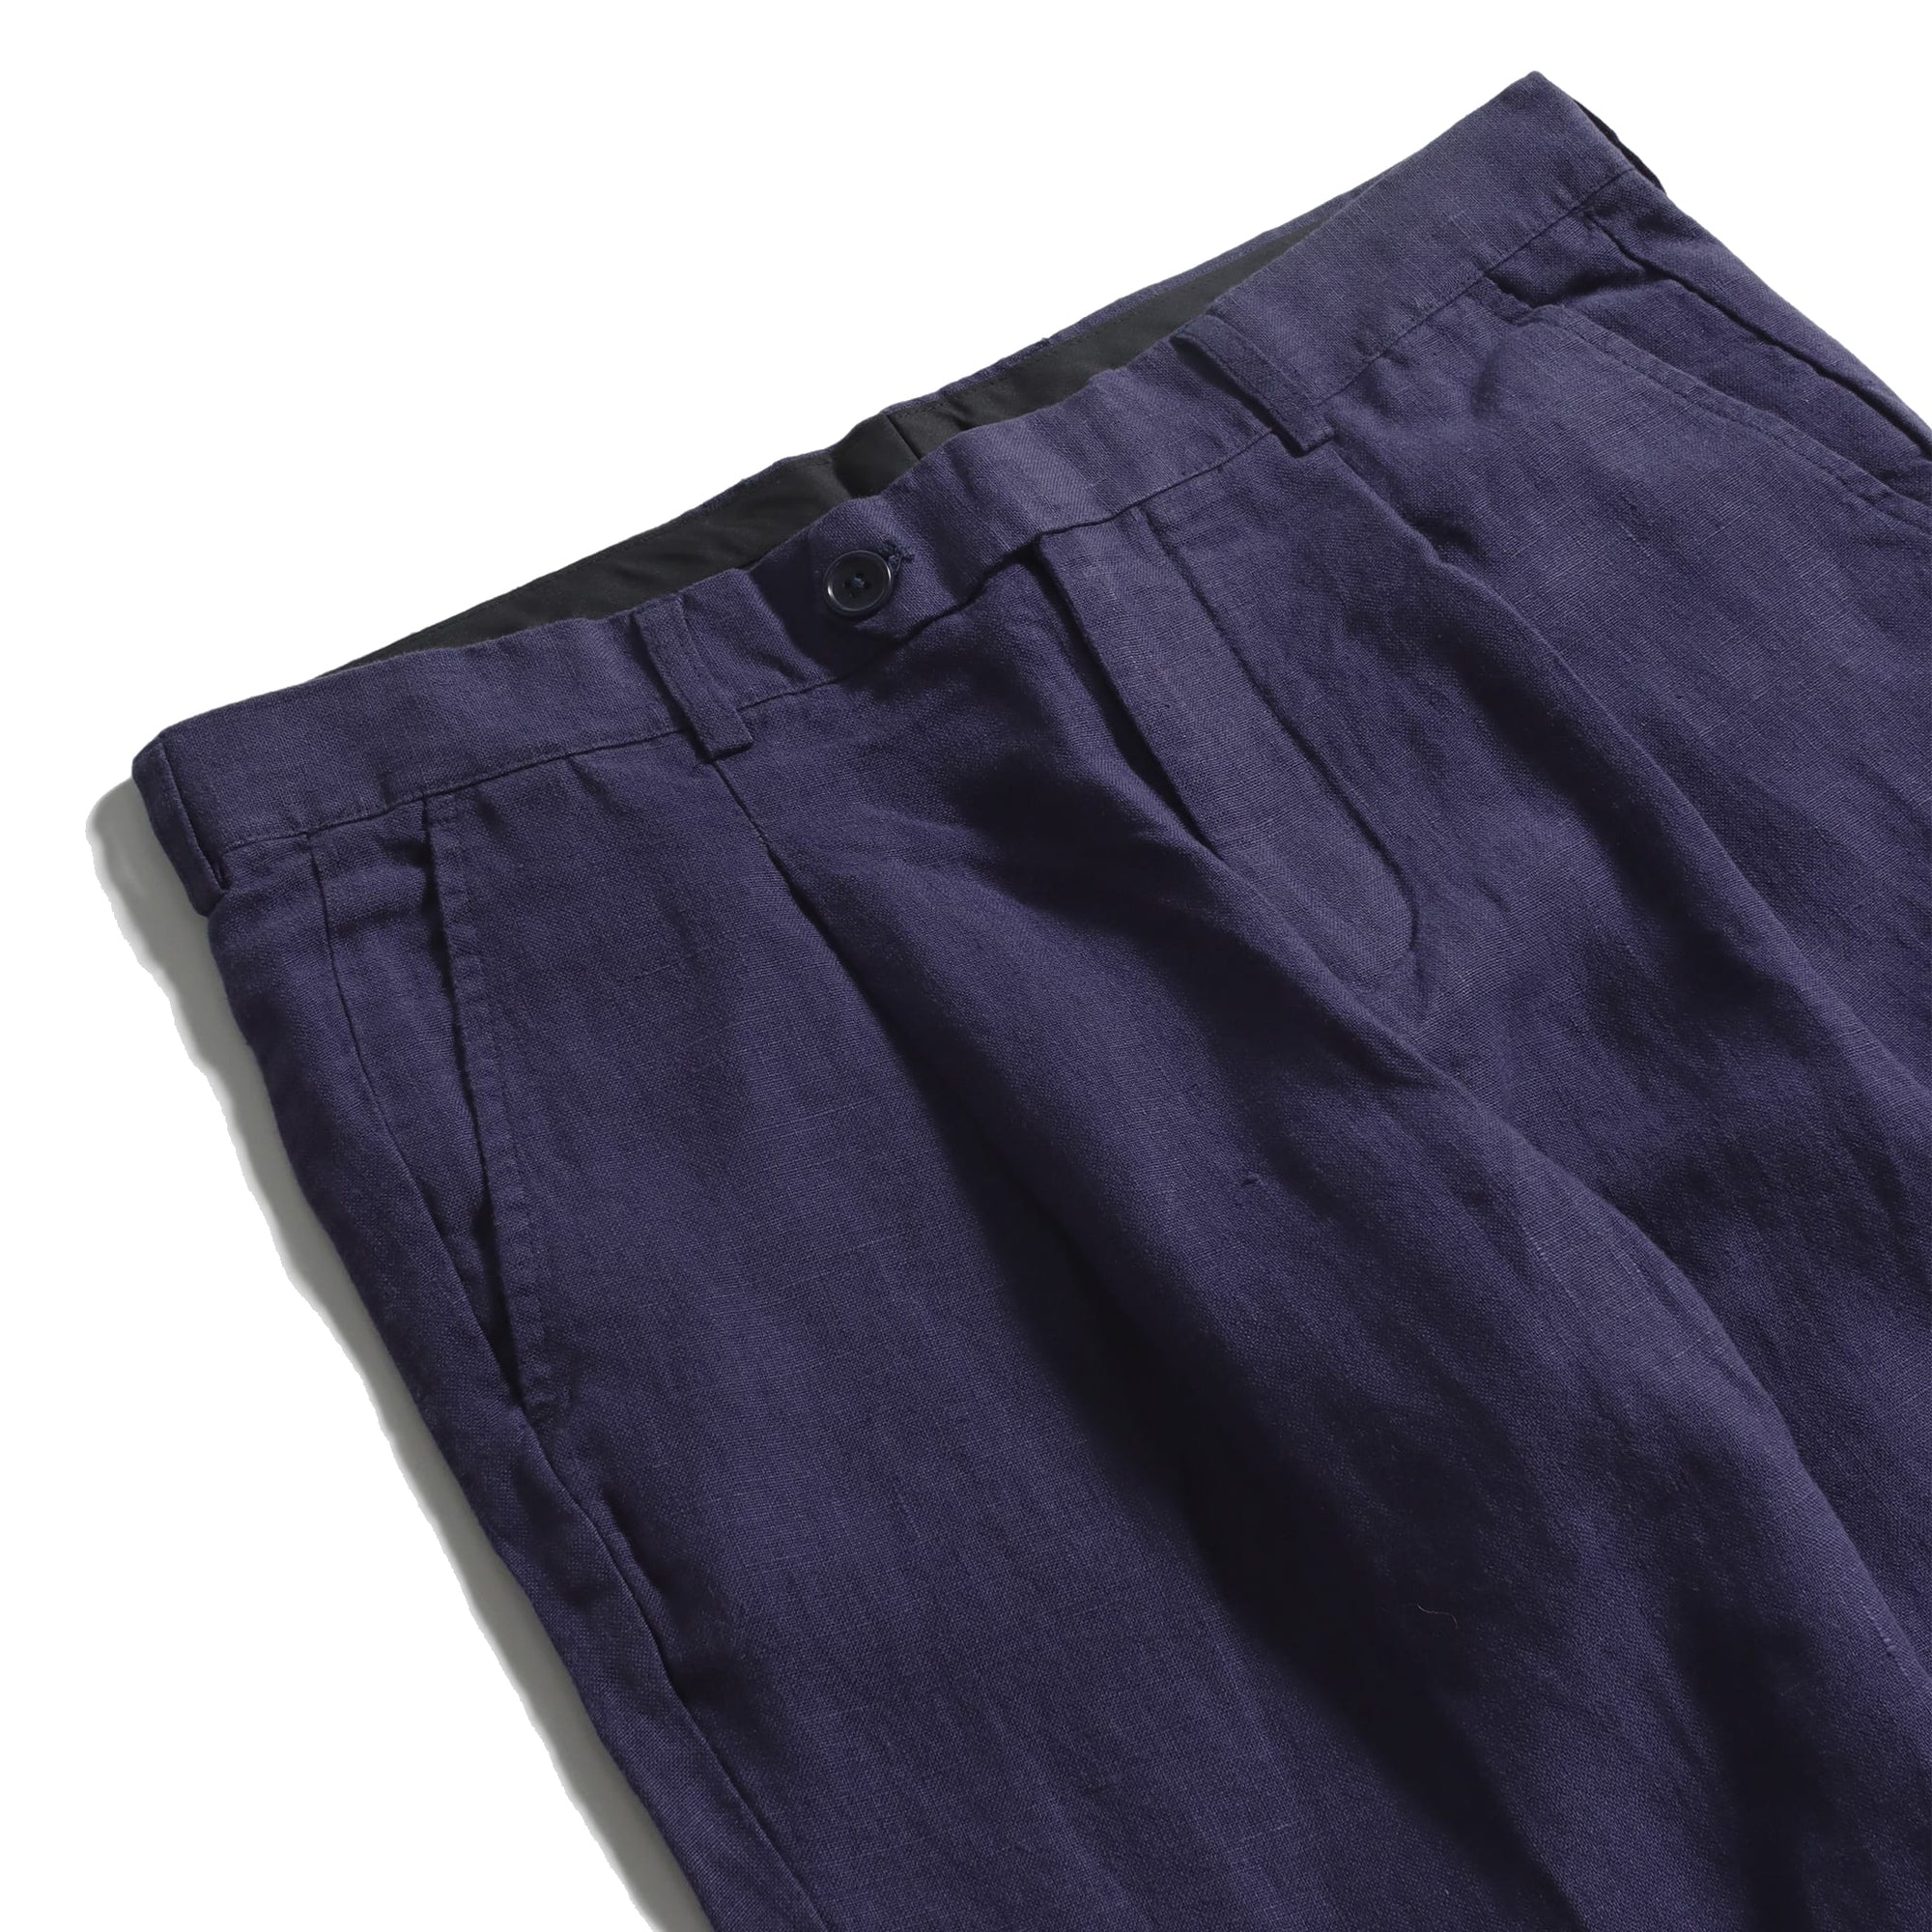 Pleated Linen Shorts ENSIGN BLUE FAR AFIELD